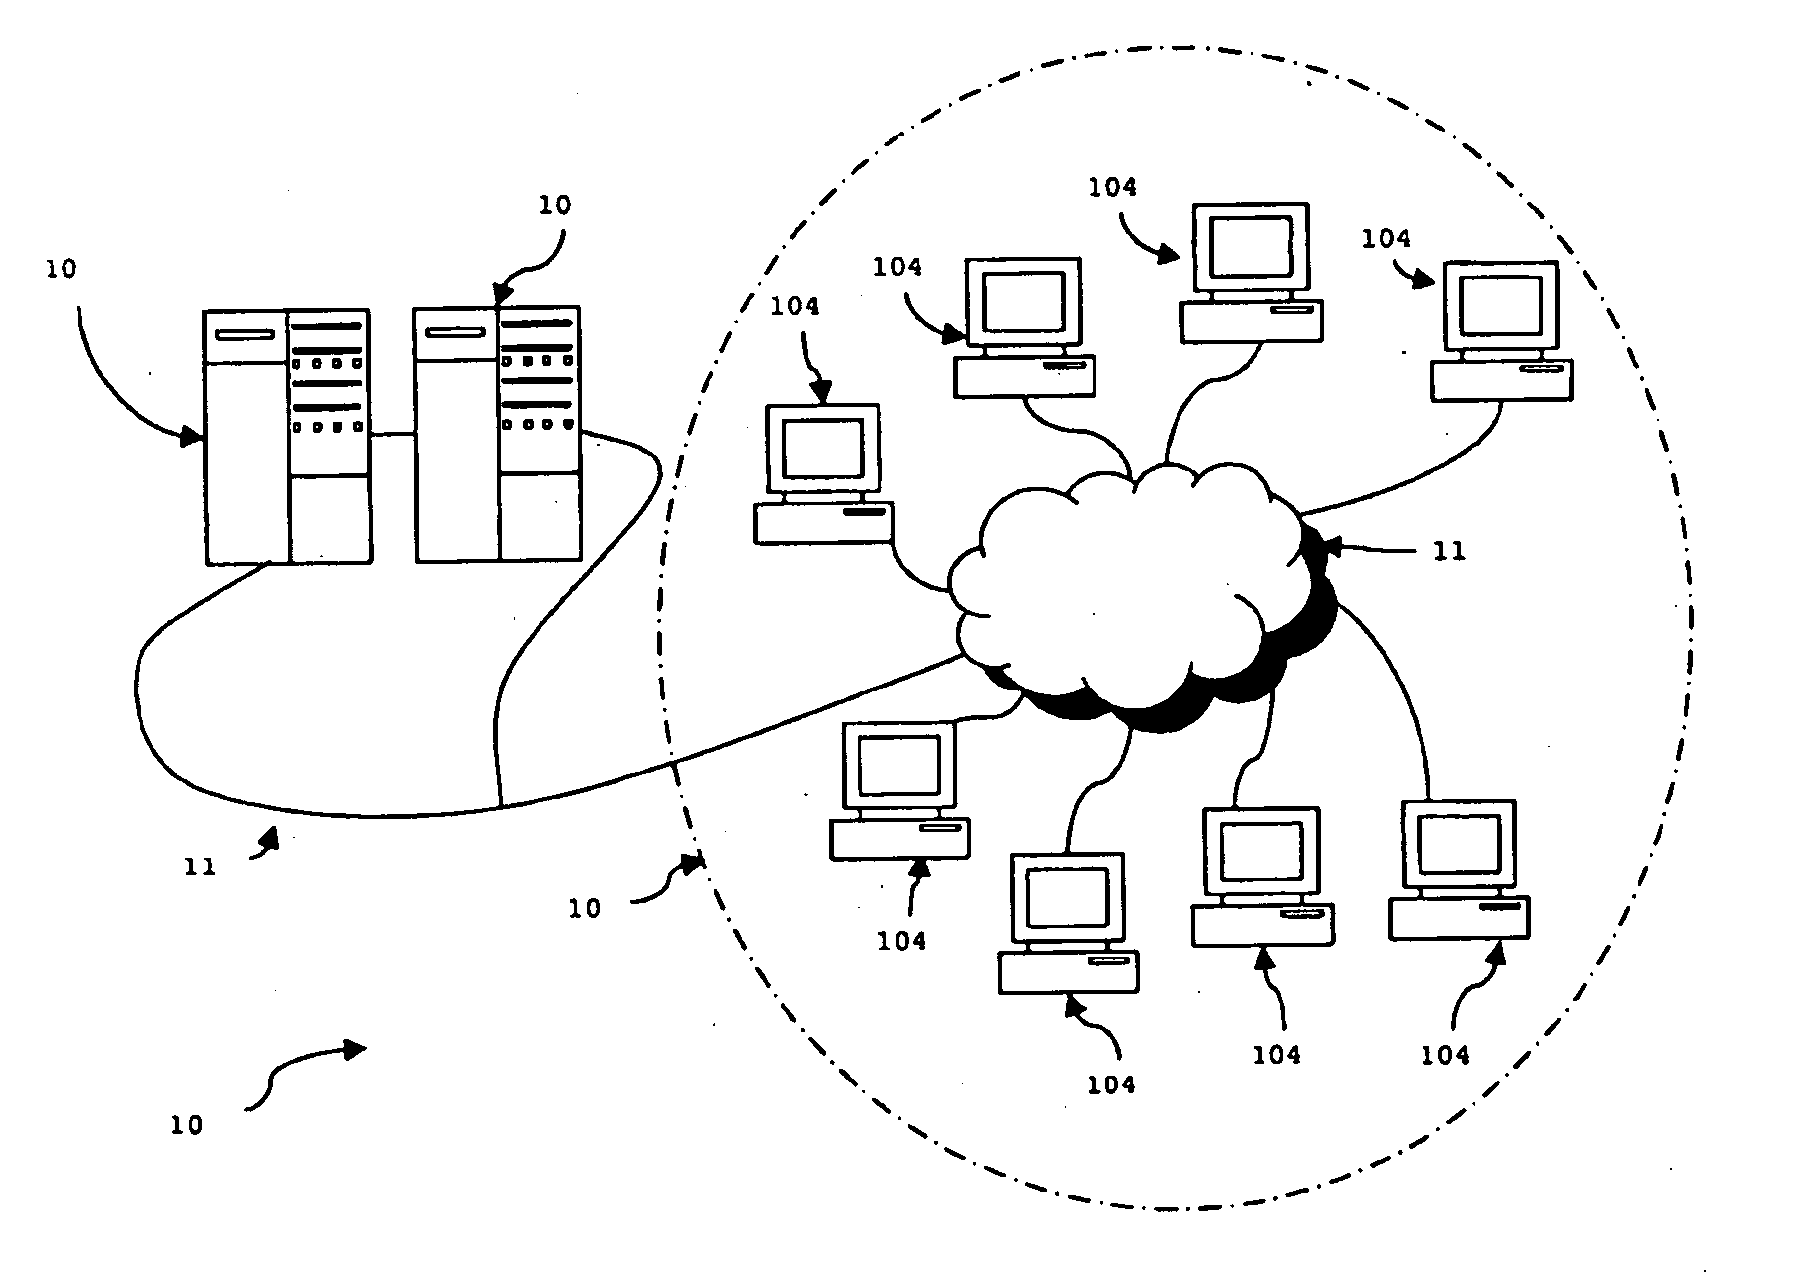 Apparatuses and methods for use in creating an audio scene